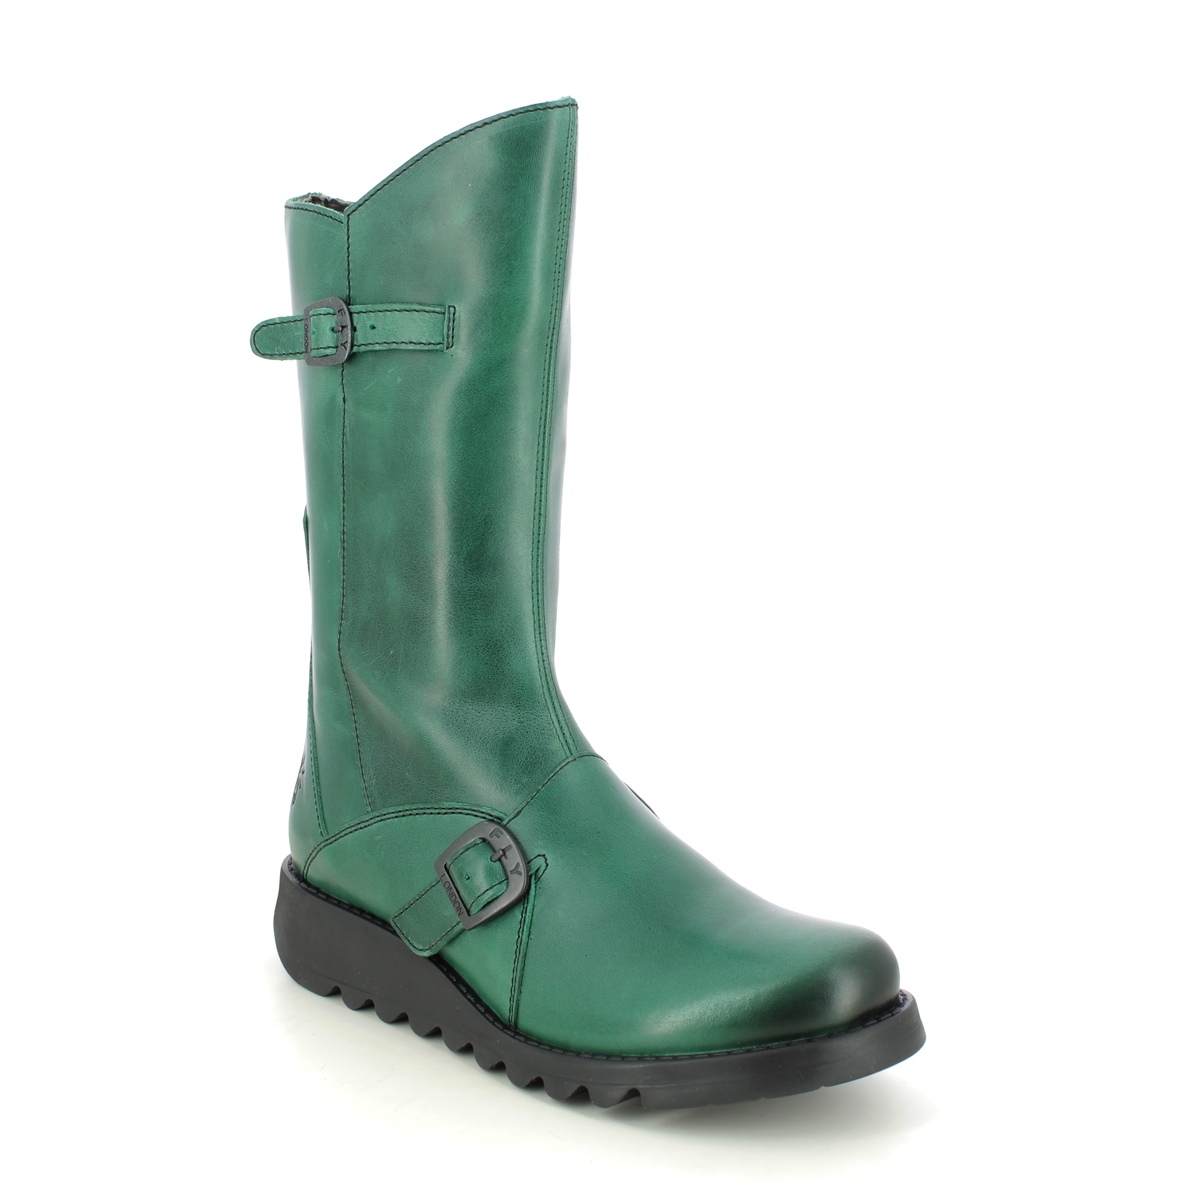 Fly London Mes 2 Green Womens Mid Calf Boots P142913-033 in a Plain Leather in Size 37